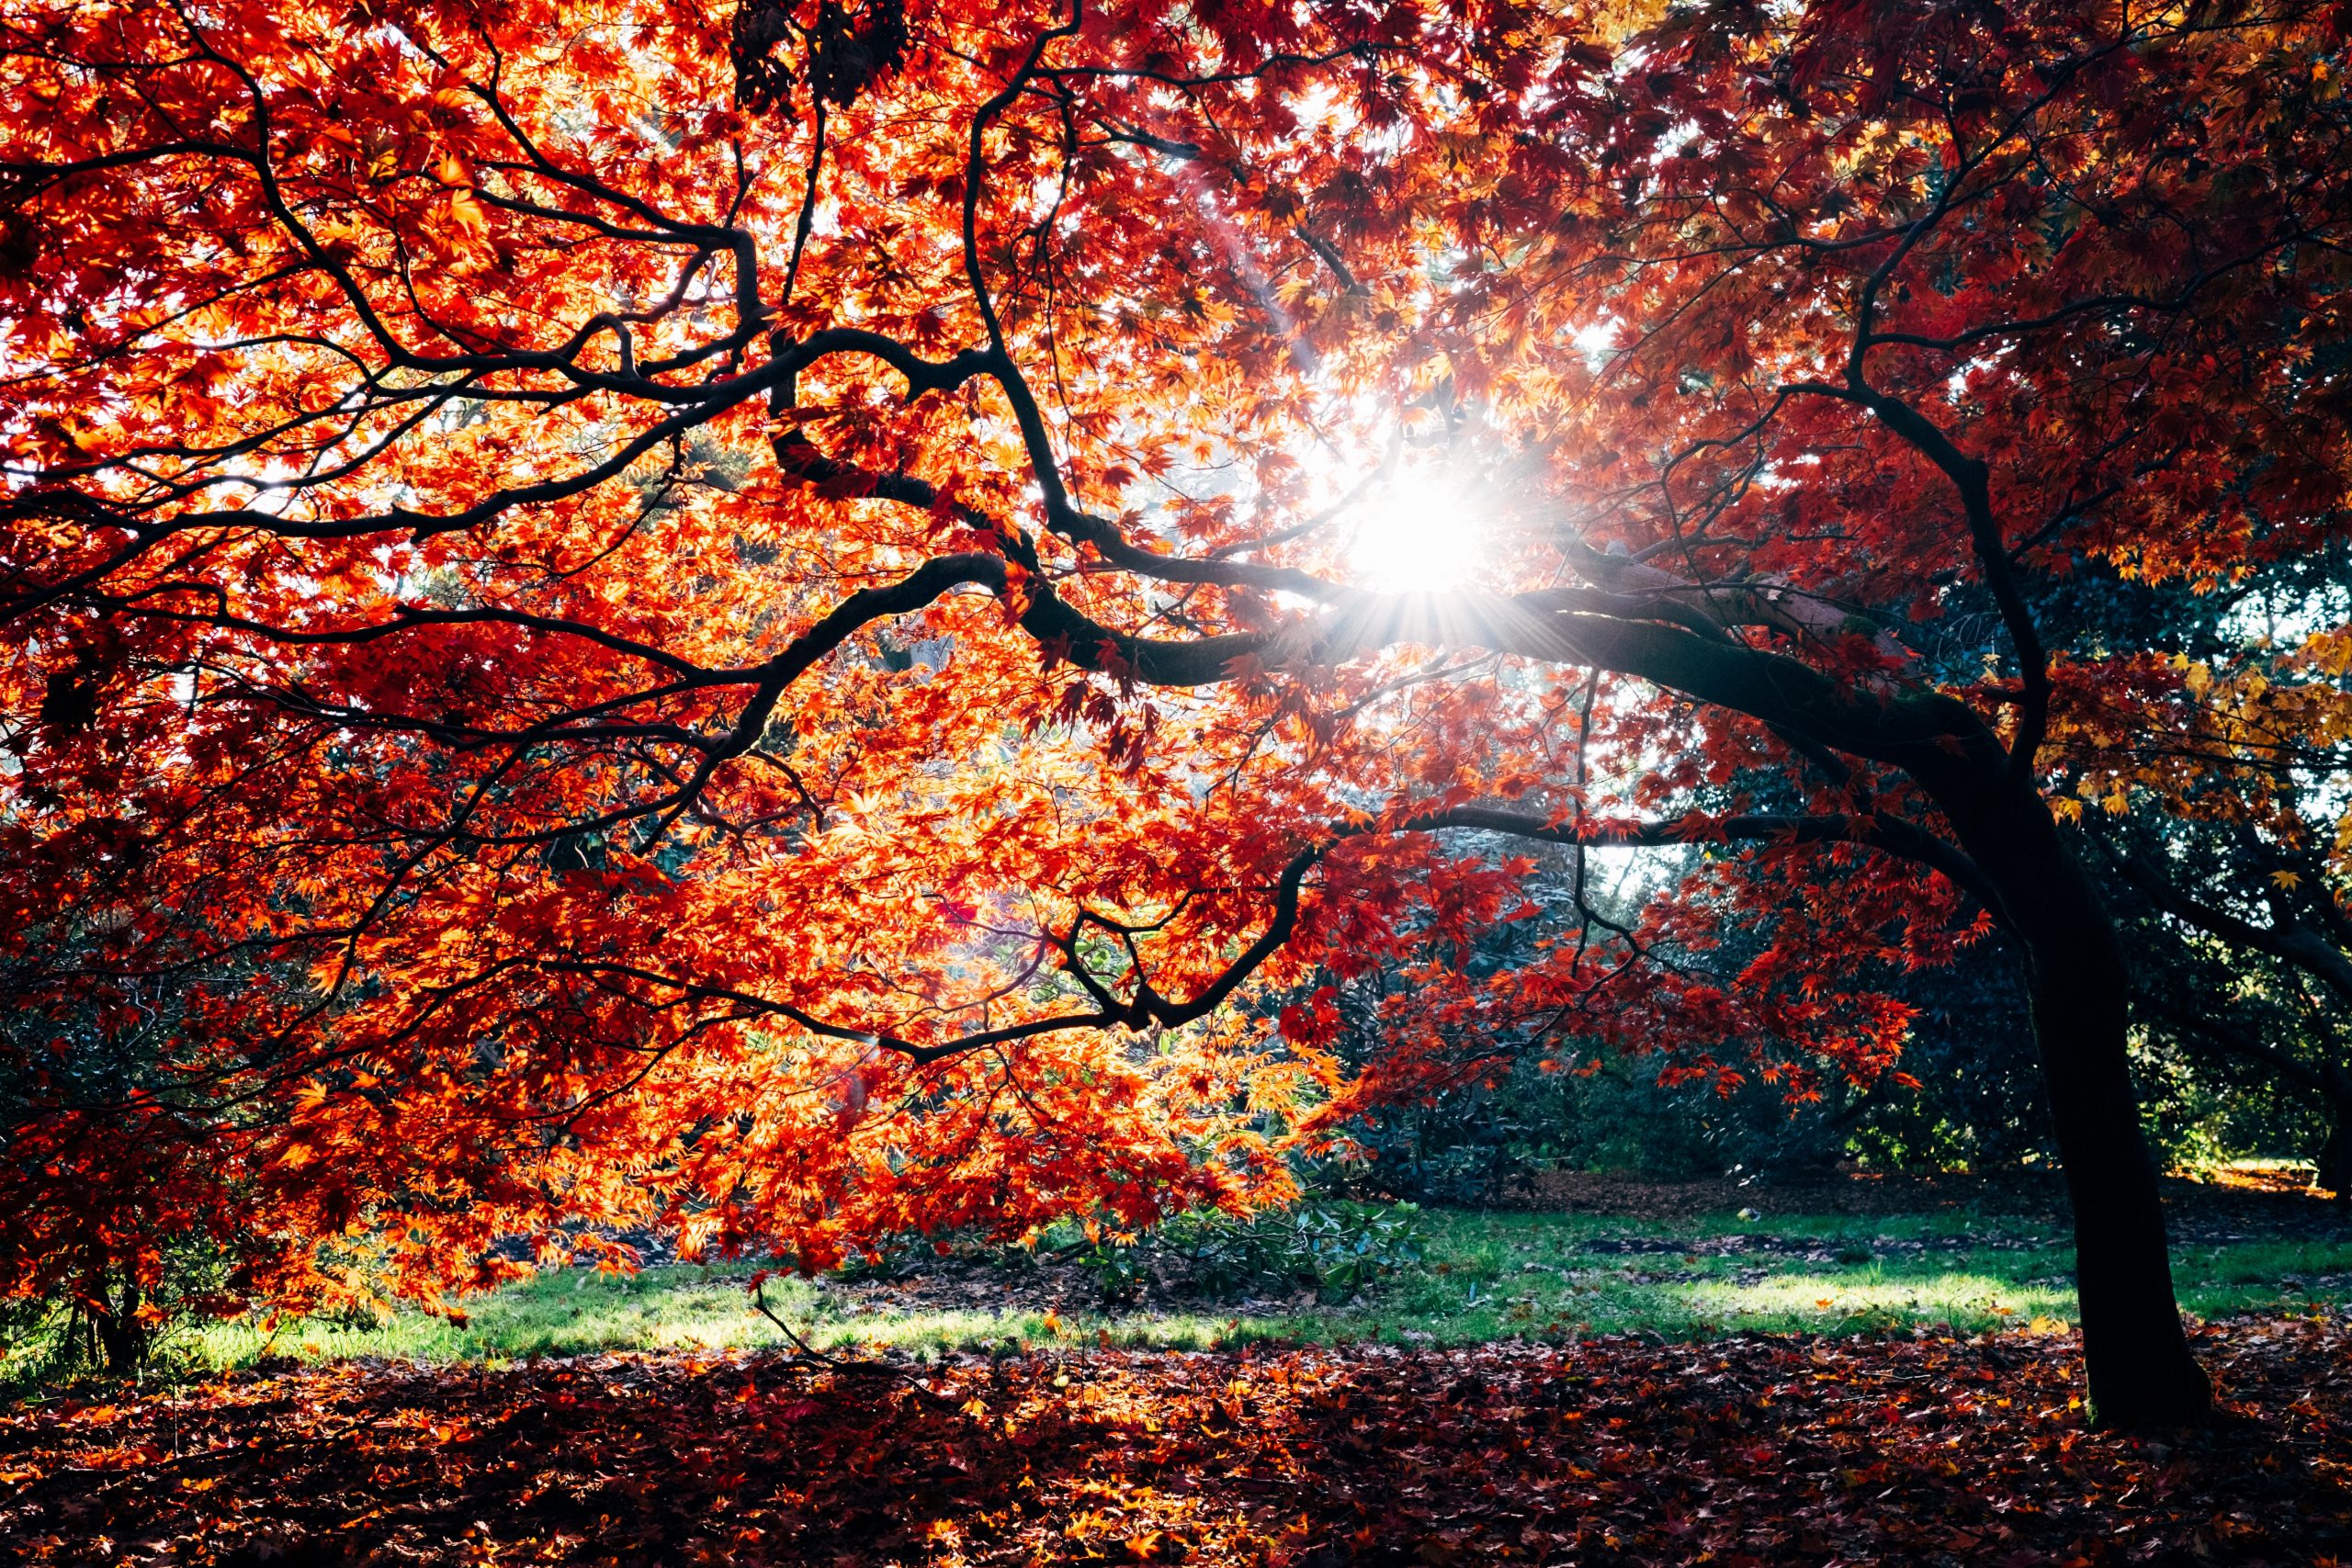 Tree with Red Leaves Wallpaper - High Definition, High Resolution HD  Wallpapers : High Definition, High Resolution HD Wallpapers